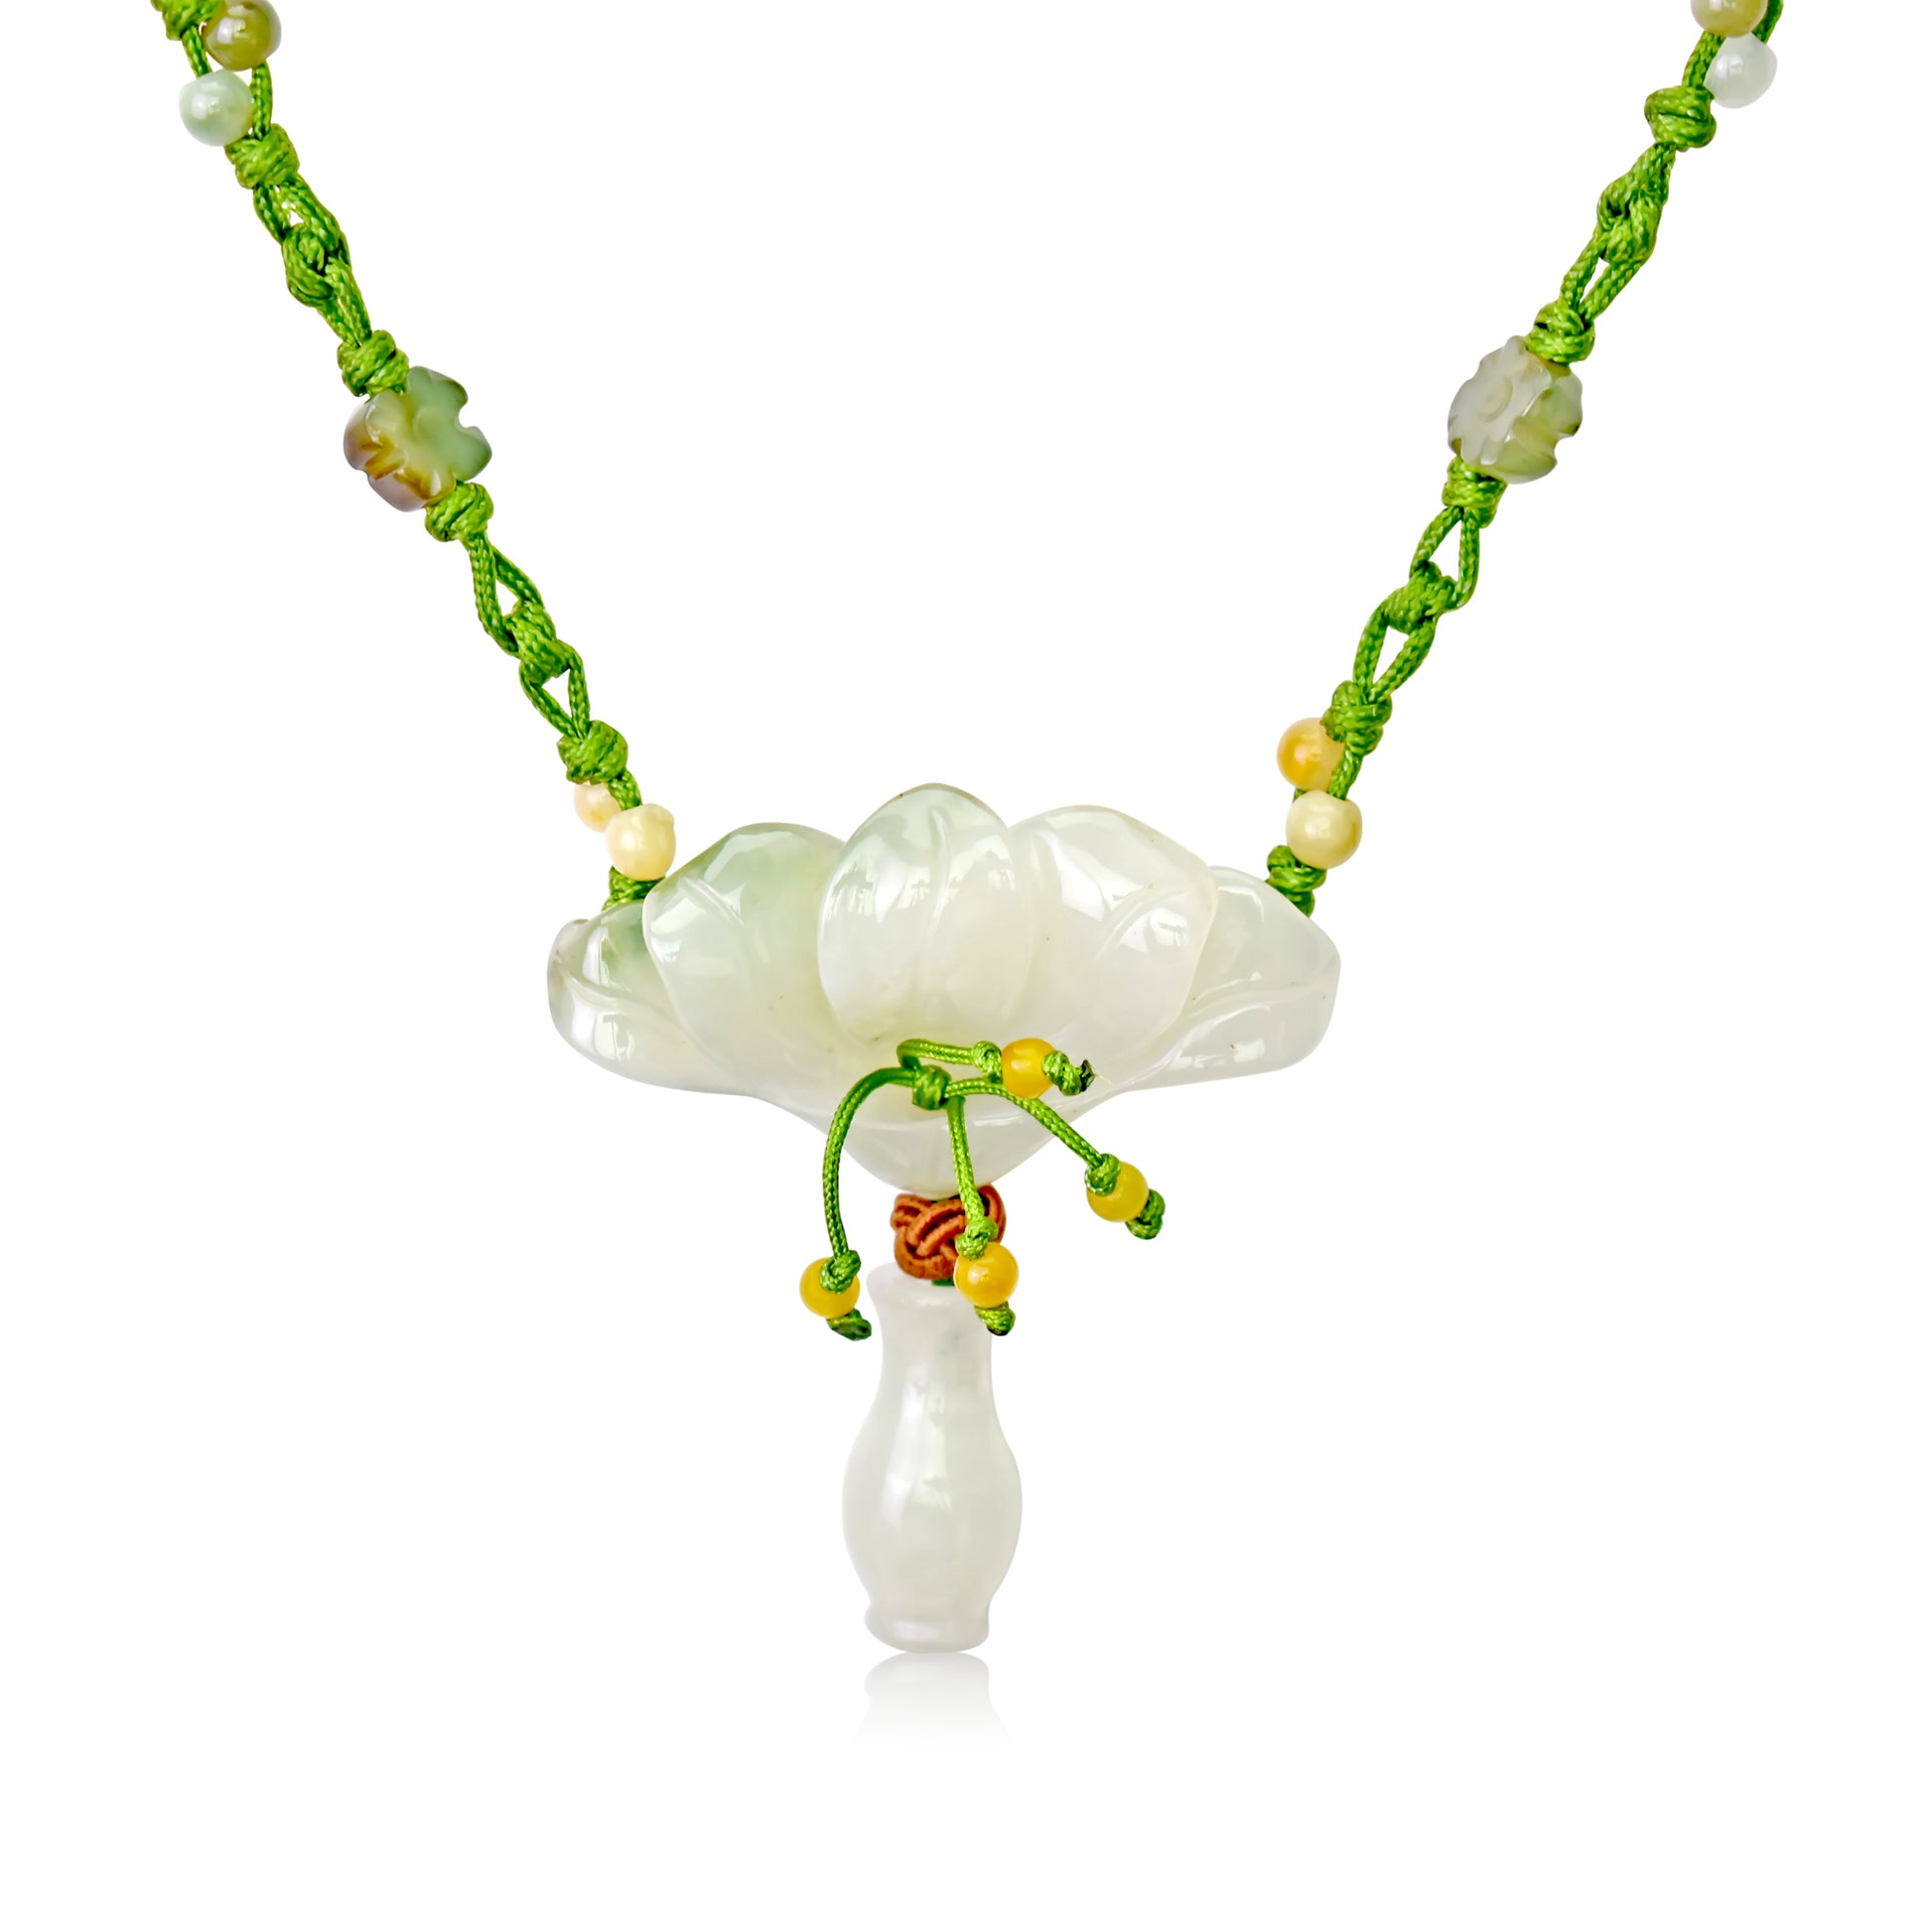 Achieve Beauty and Integrity with Peacock Flower Jade Necklace with Lime Cord